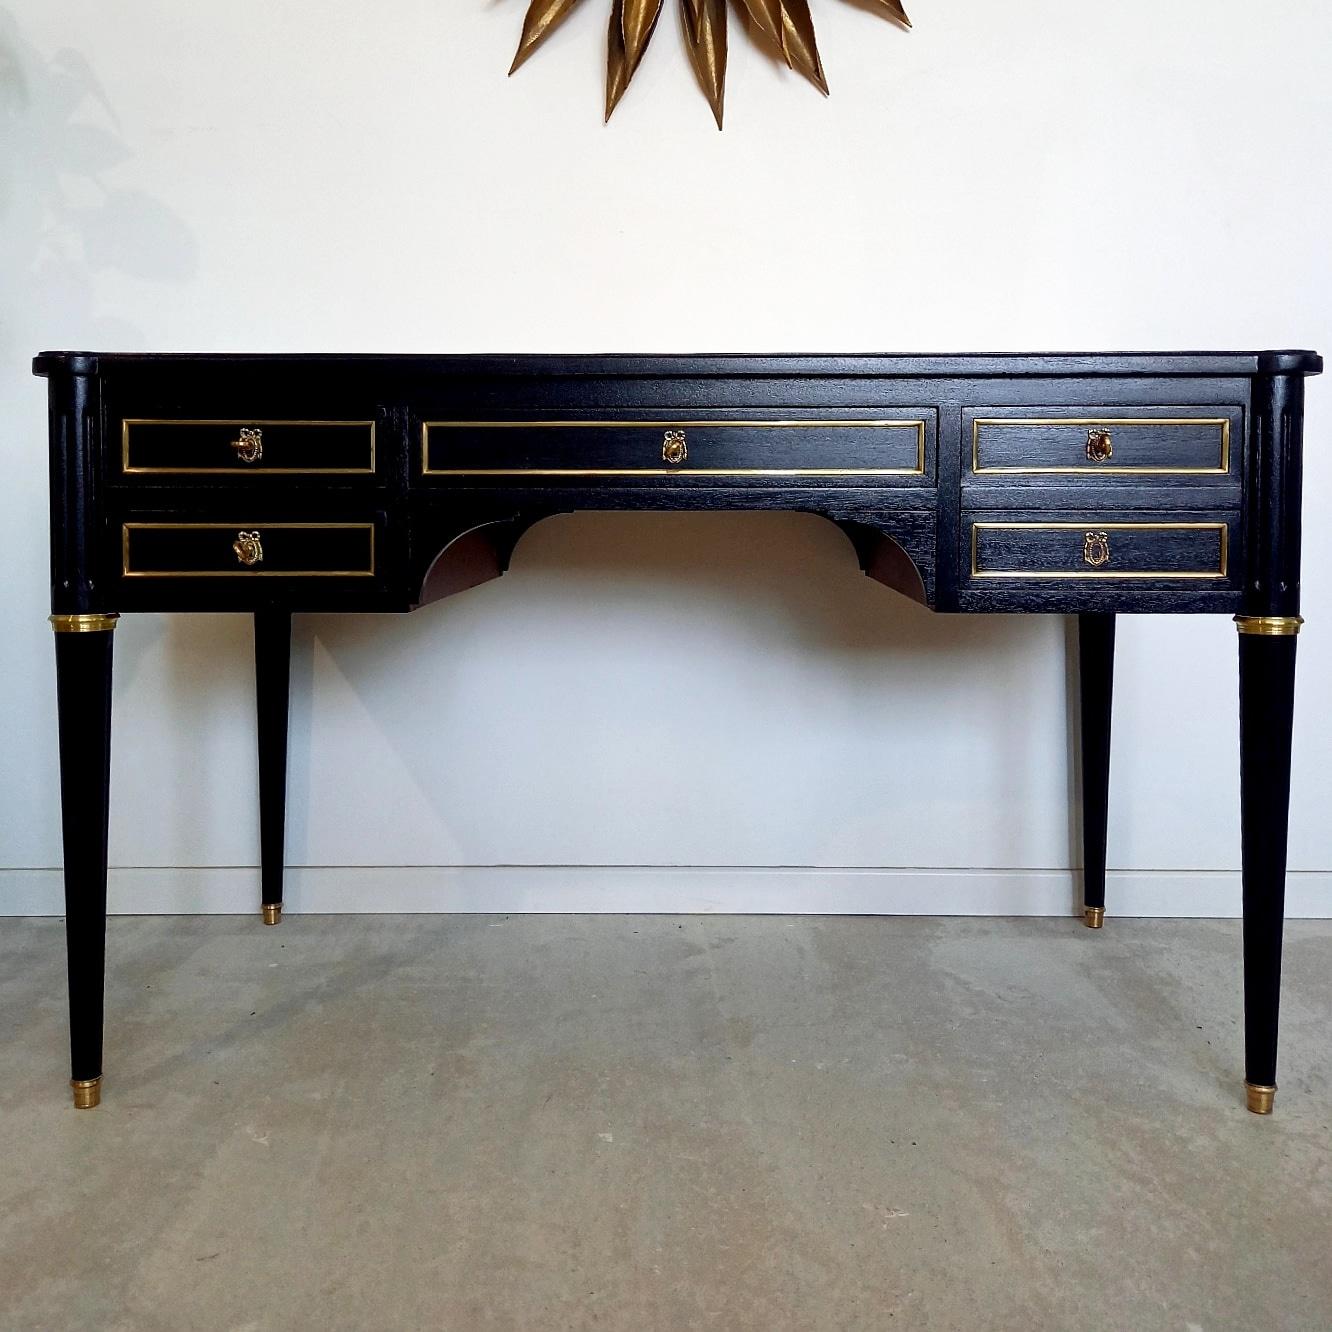 Antique Louis XVI style desk from the 20th century, with cognac leather top and gold embossed frieze.
The front of the piece has four dovetail drawers with brass details. The right double drawer is actually a single deep drawer with a secret hiding